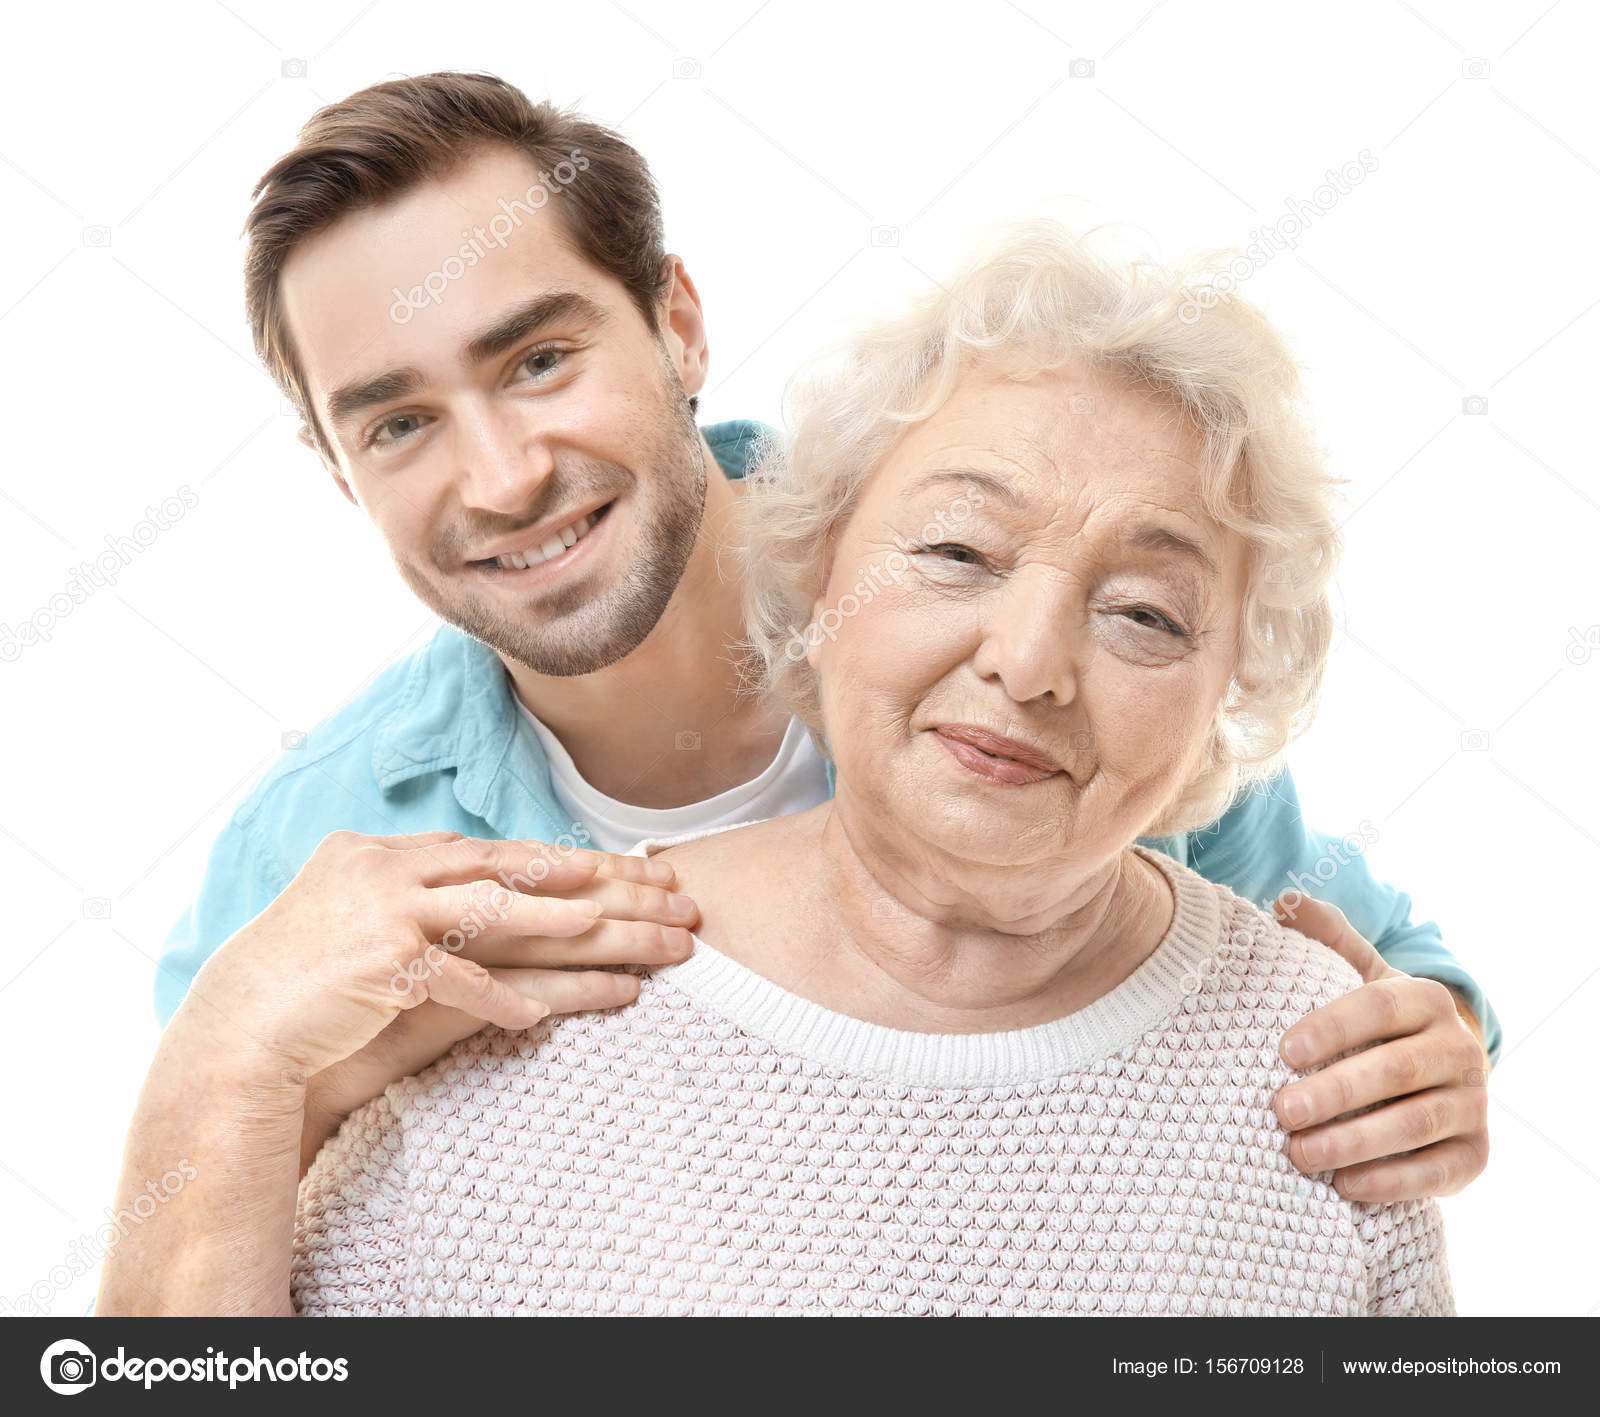 Young man with grandmother — Stock Photo © belchonock #156709128